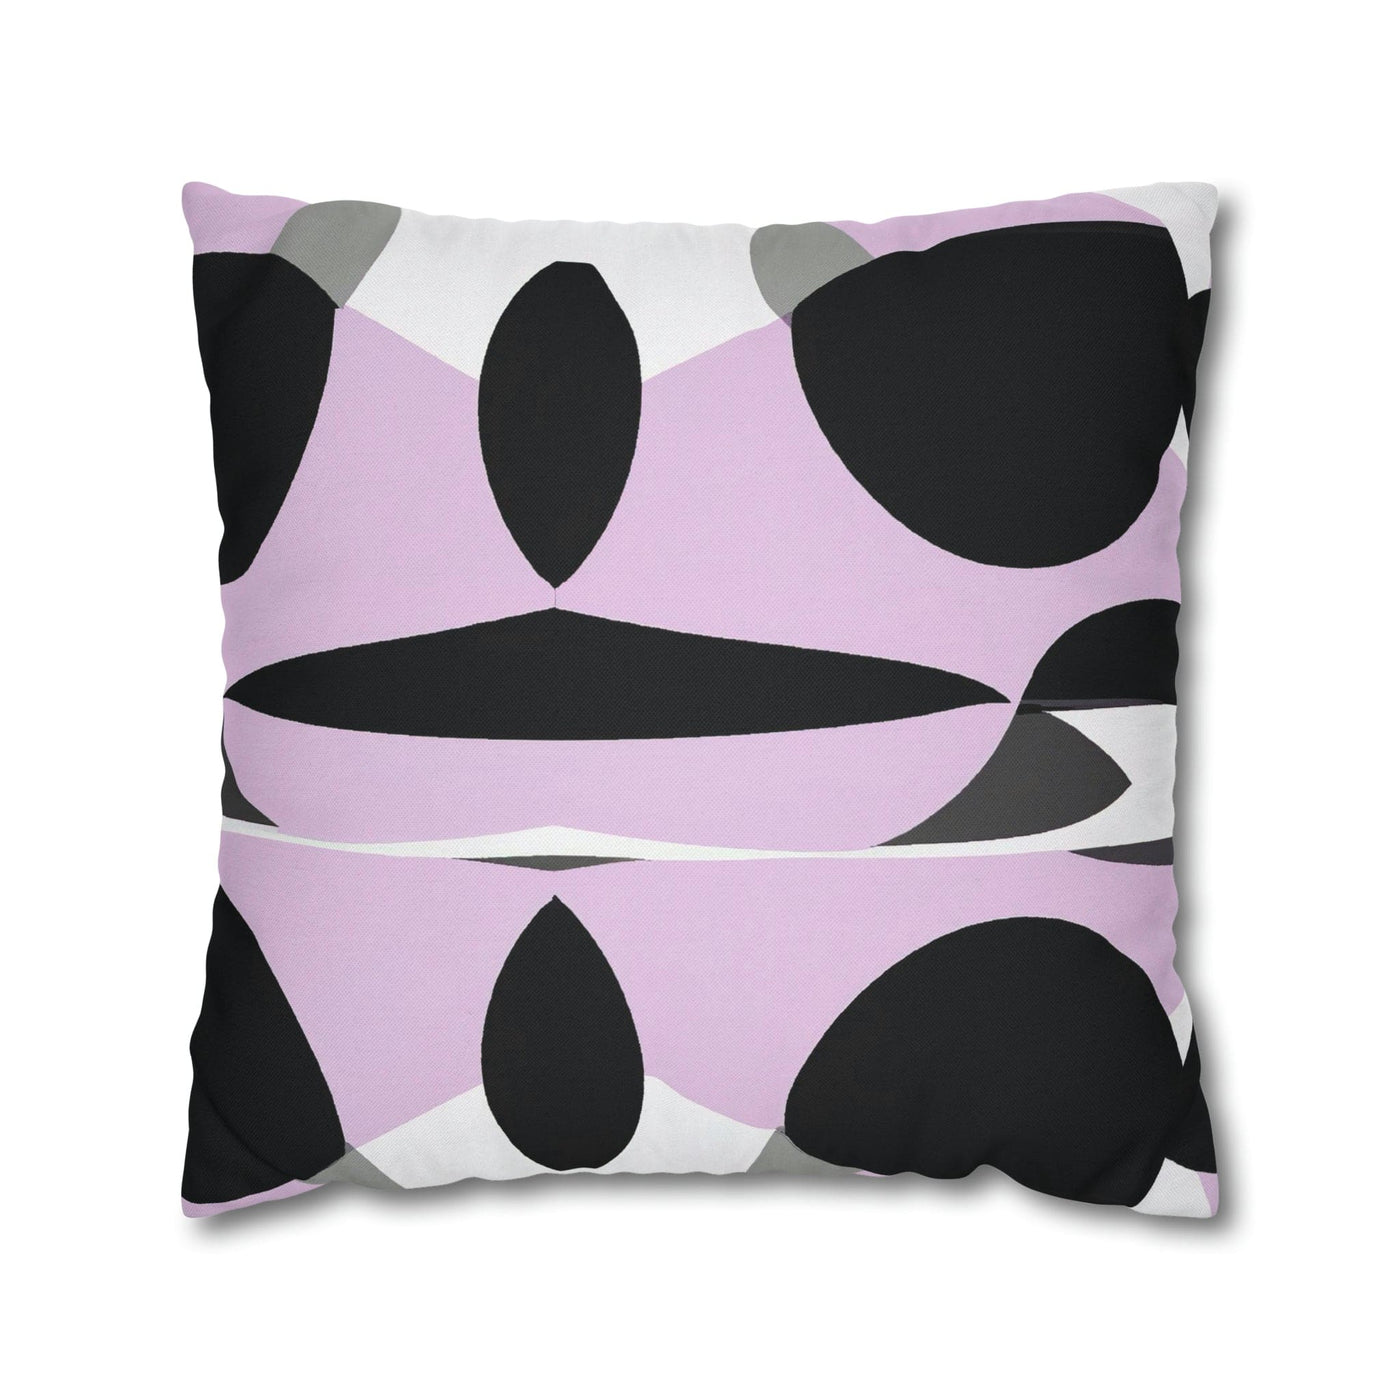 Decorative Throw Pillow Covers With Zipper - Set Of 2 Geometric Lavender And